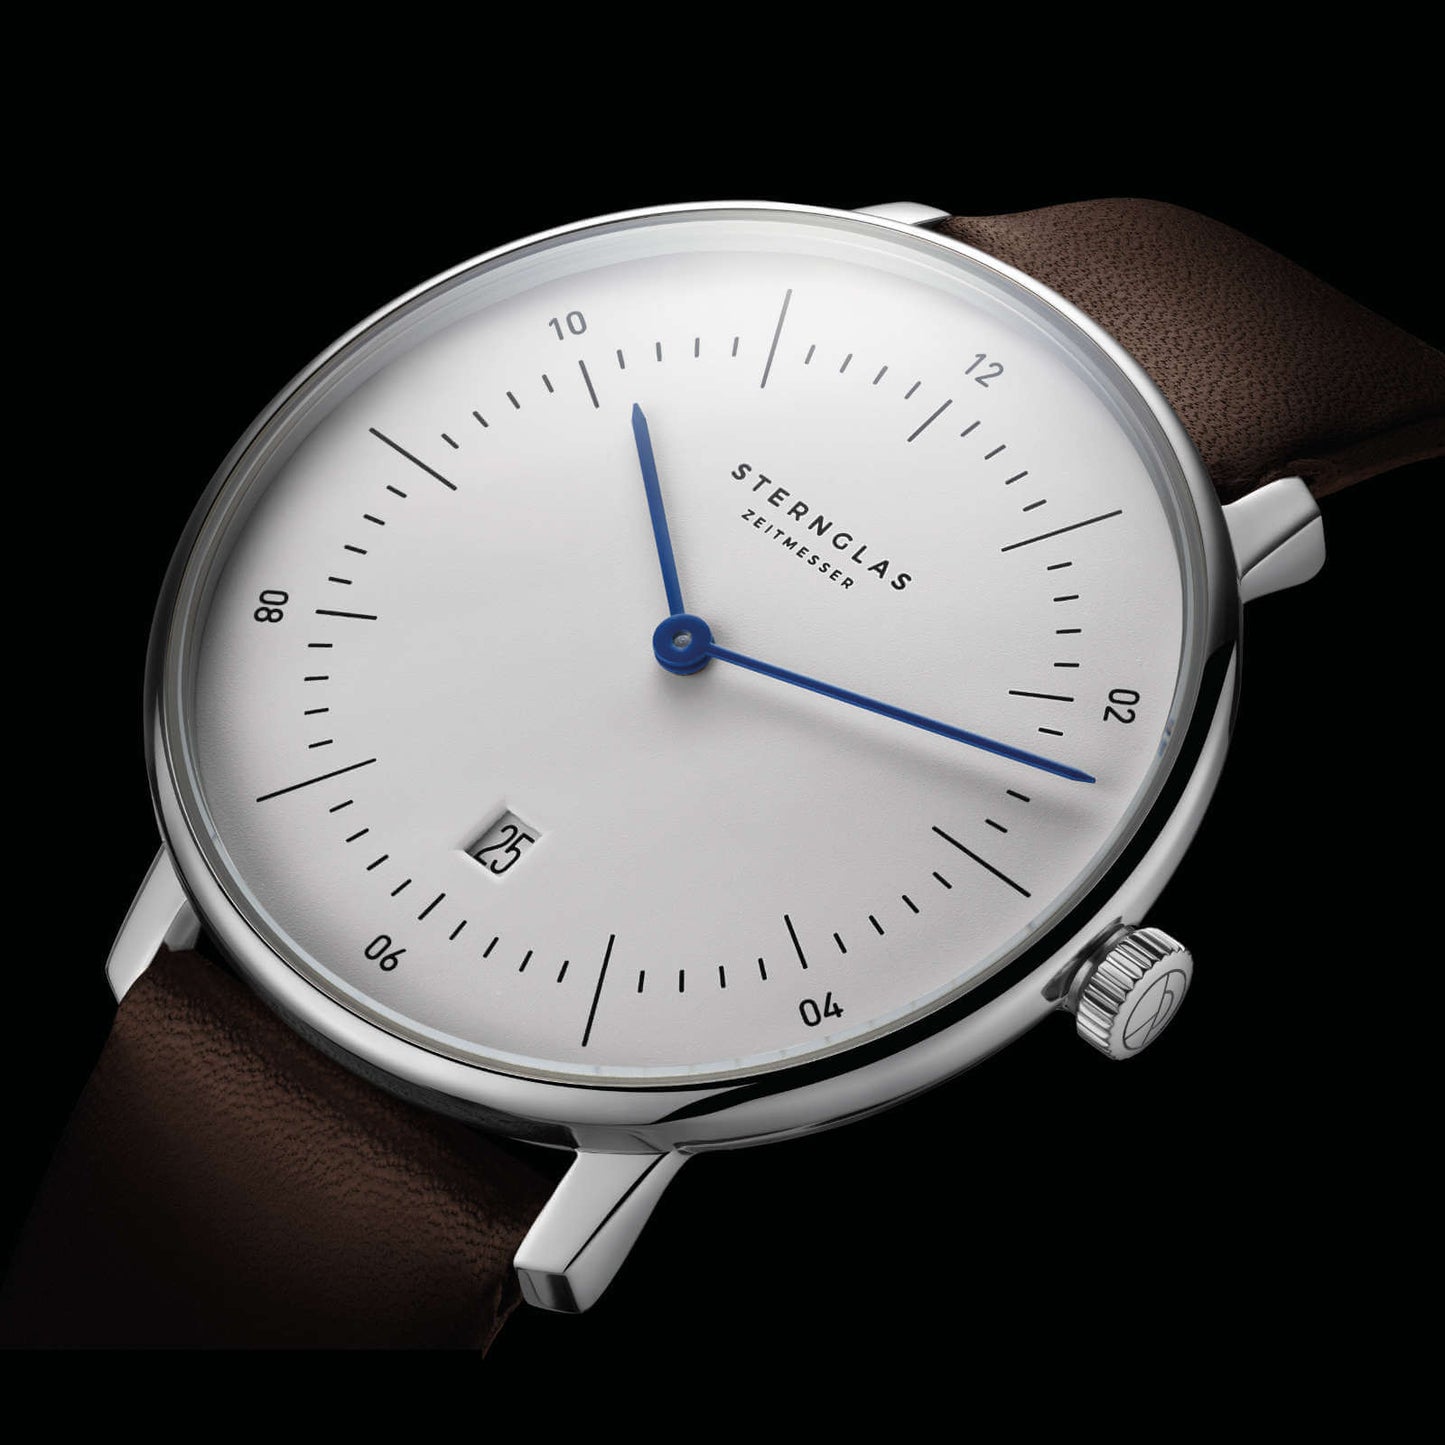 popup|Fits under any shirt sleeve|The particularly flat case design makes the Naos Quartz the ideal dress watch for everyday wear. 